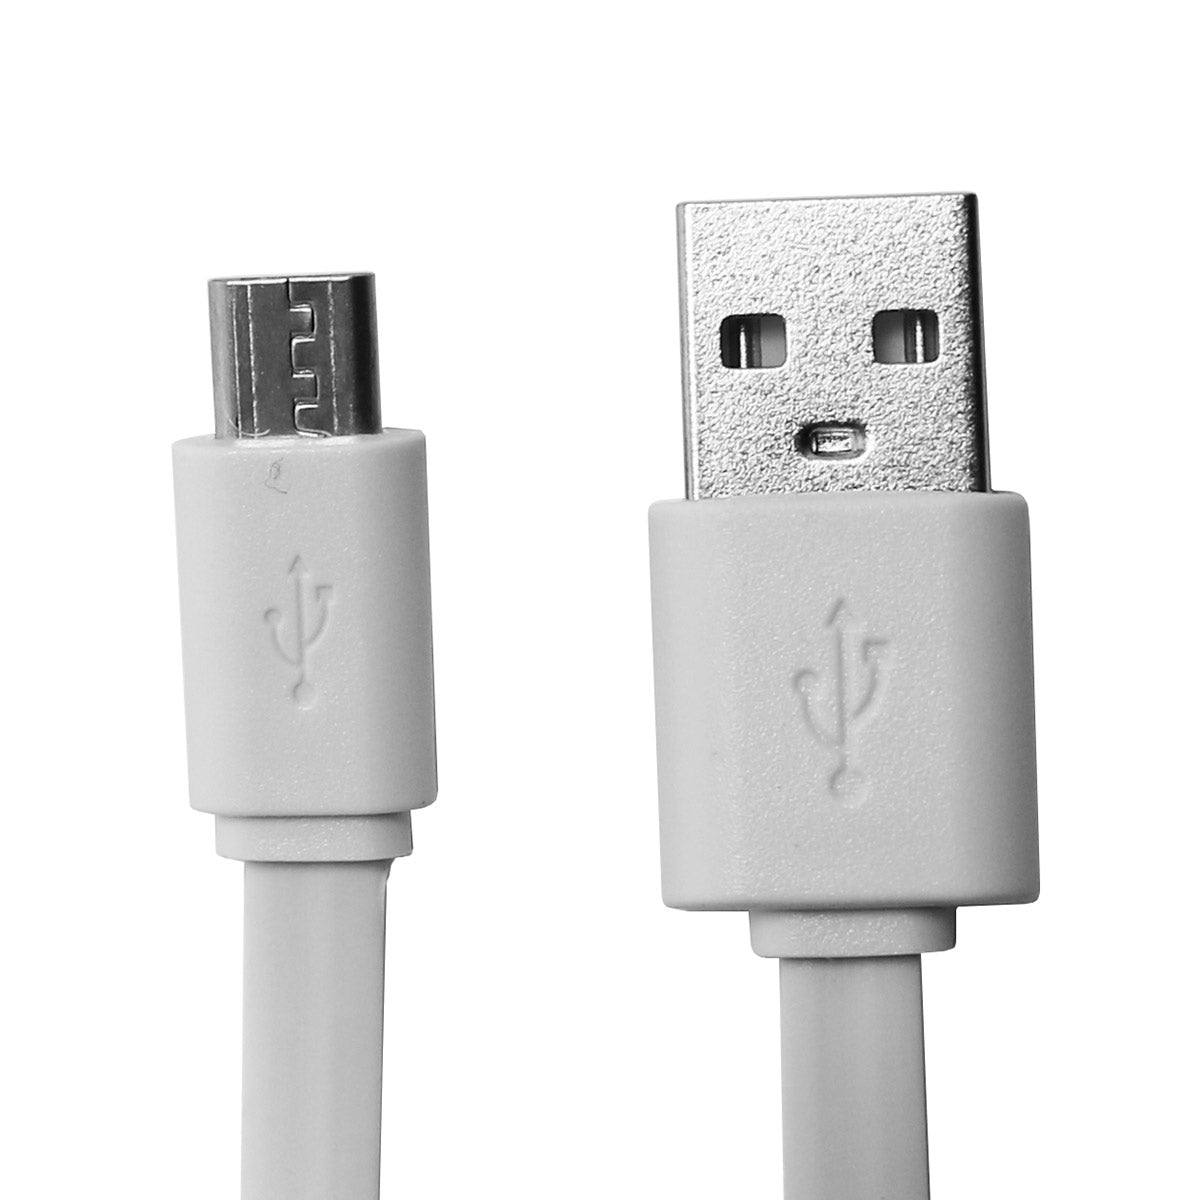 20 Pack - Micro USB Charging Cable